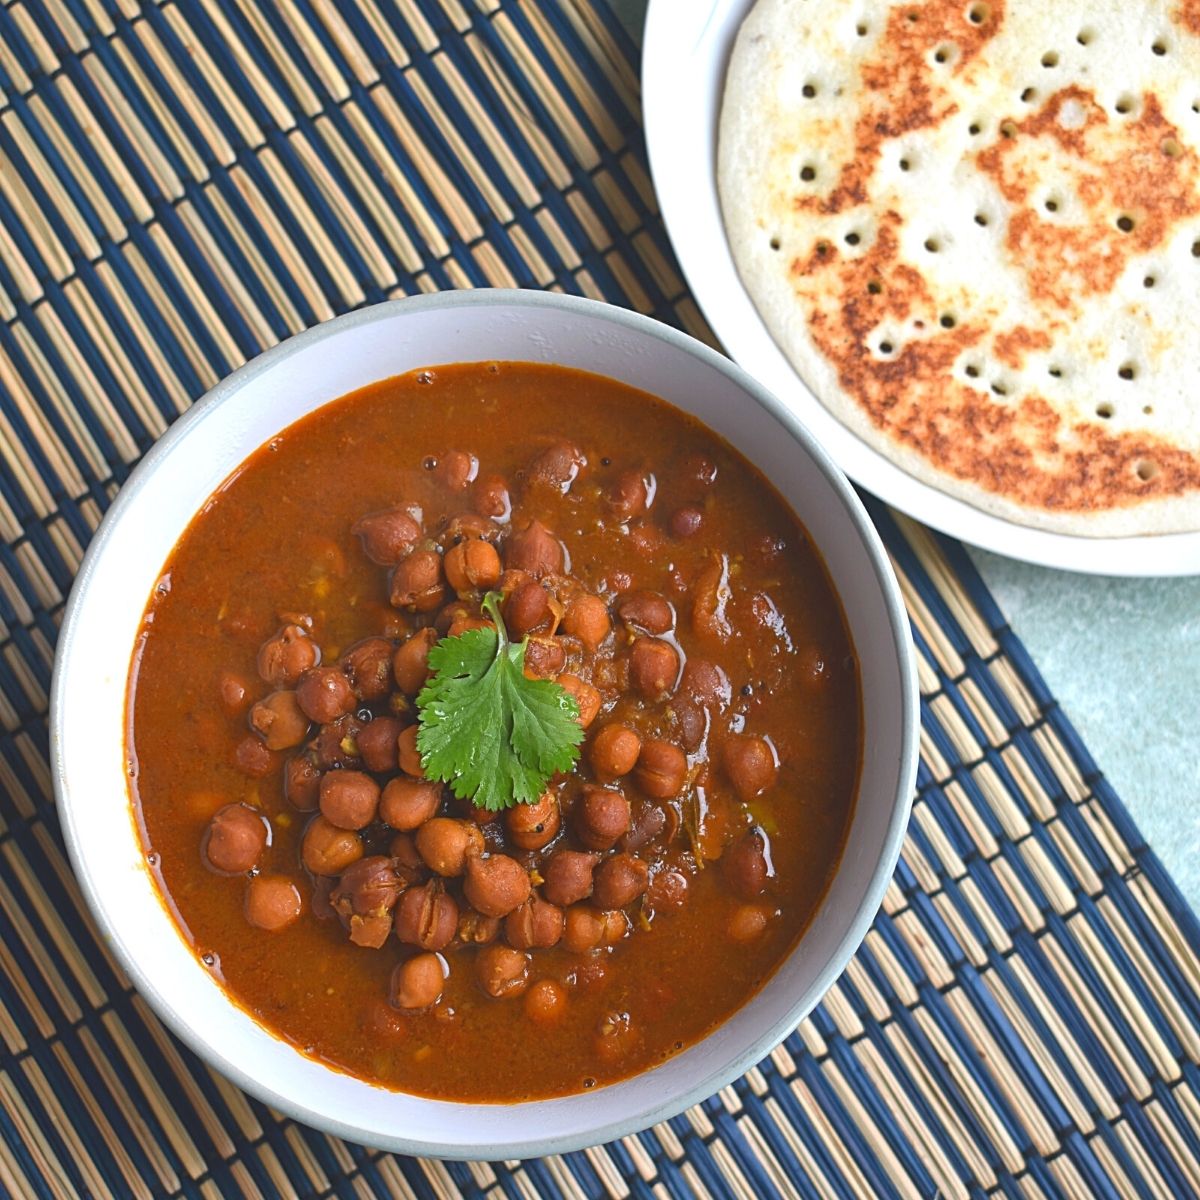 Kala Chana Served in a bowl and seen on a blue brown placemat. Seen along are some amboli served